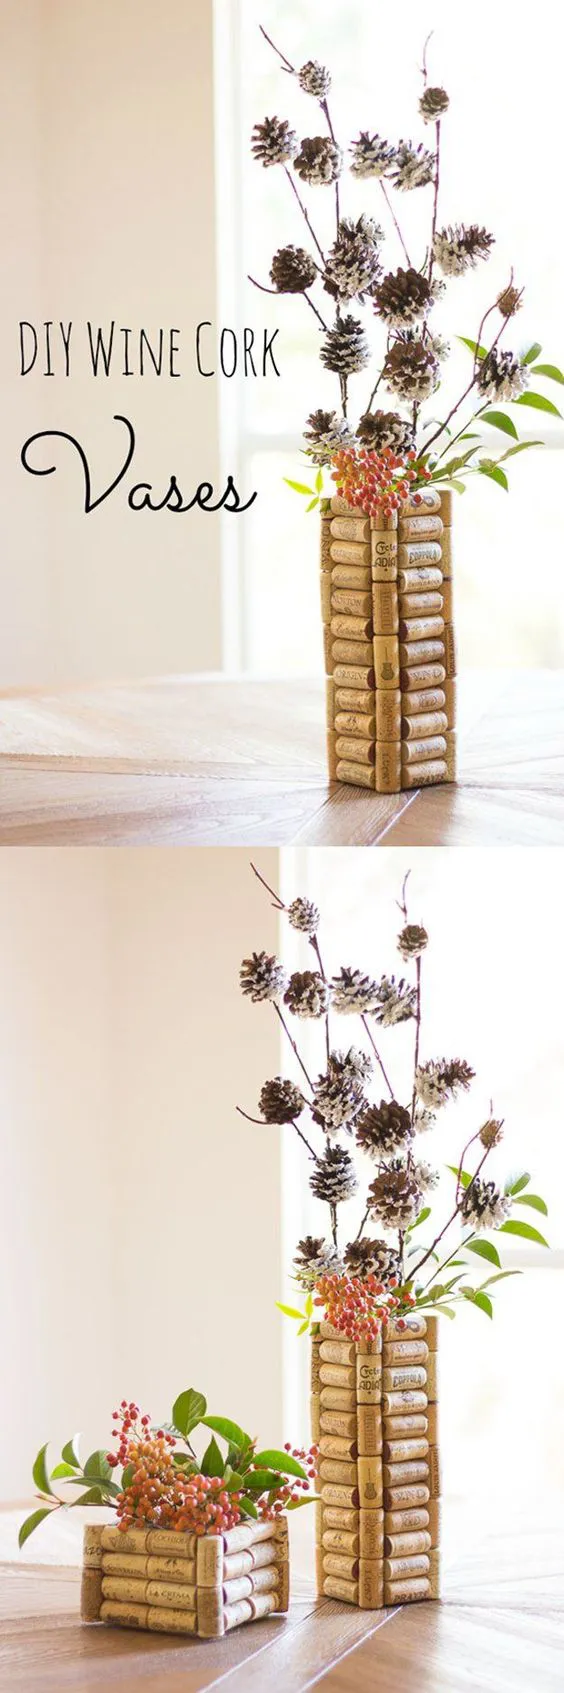 43 More DIY Wine Cork Crafts Ideas http://DIYReady.com | Easy DIY Crafts, Fun Projects, & DIY Craft Ideas For Kids & Adults